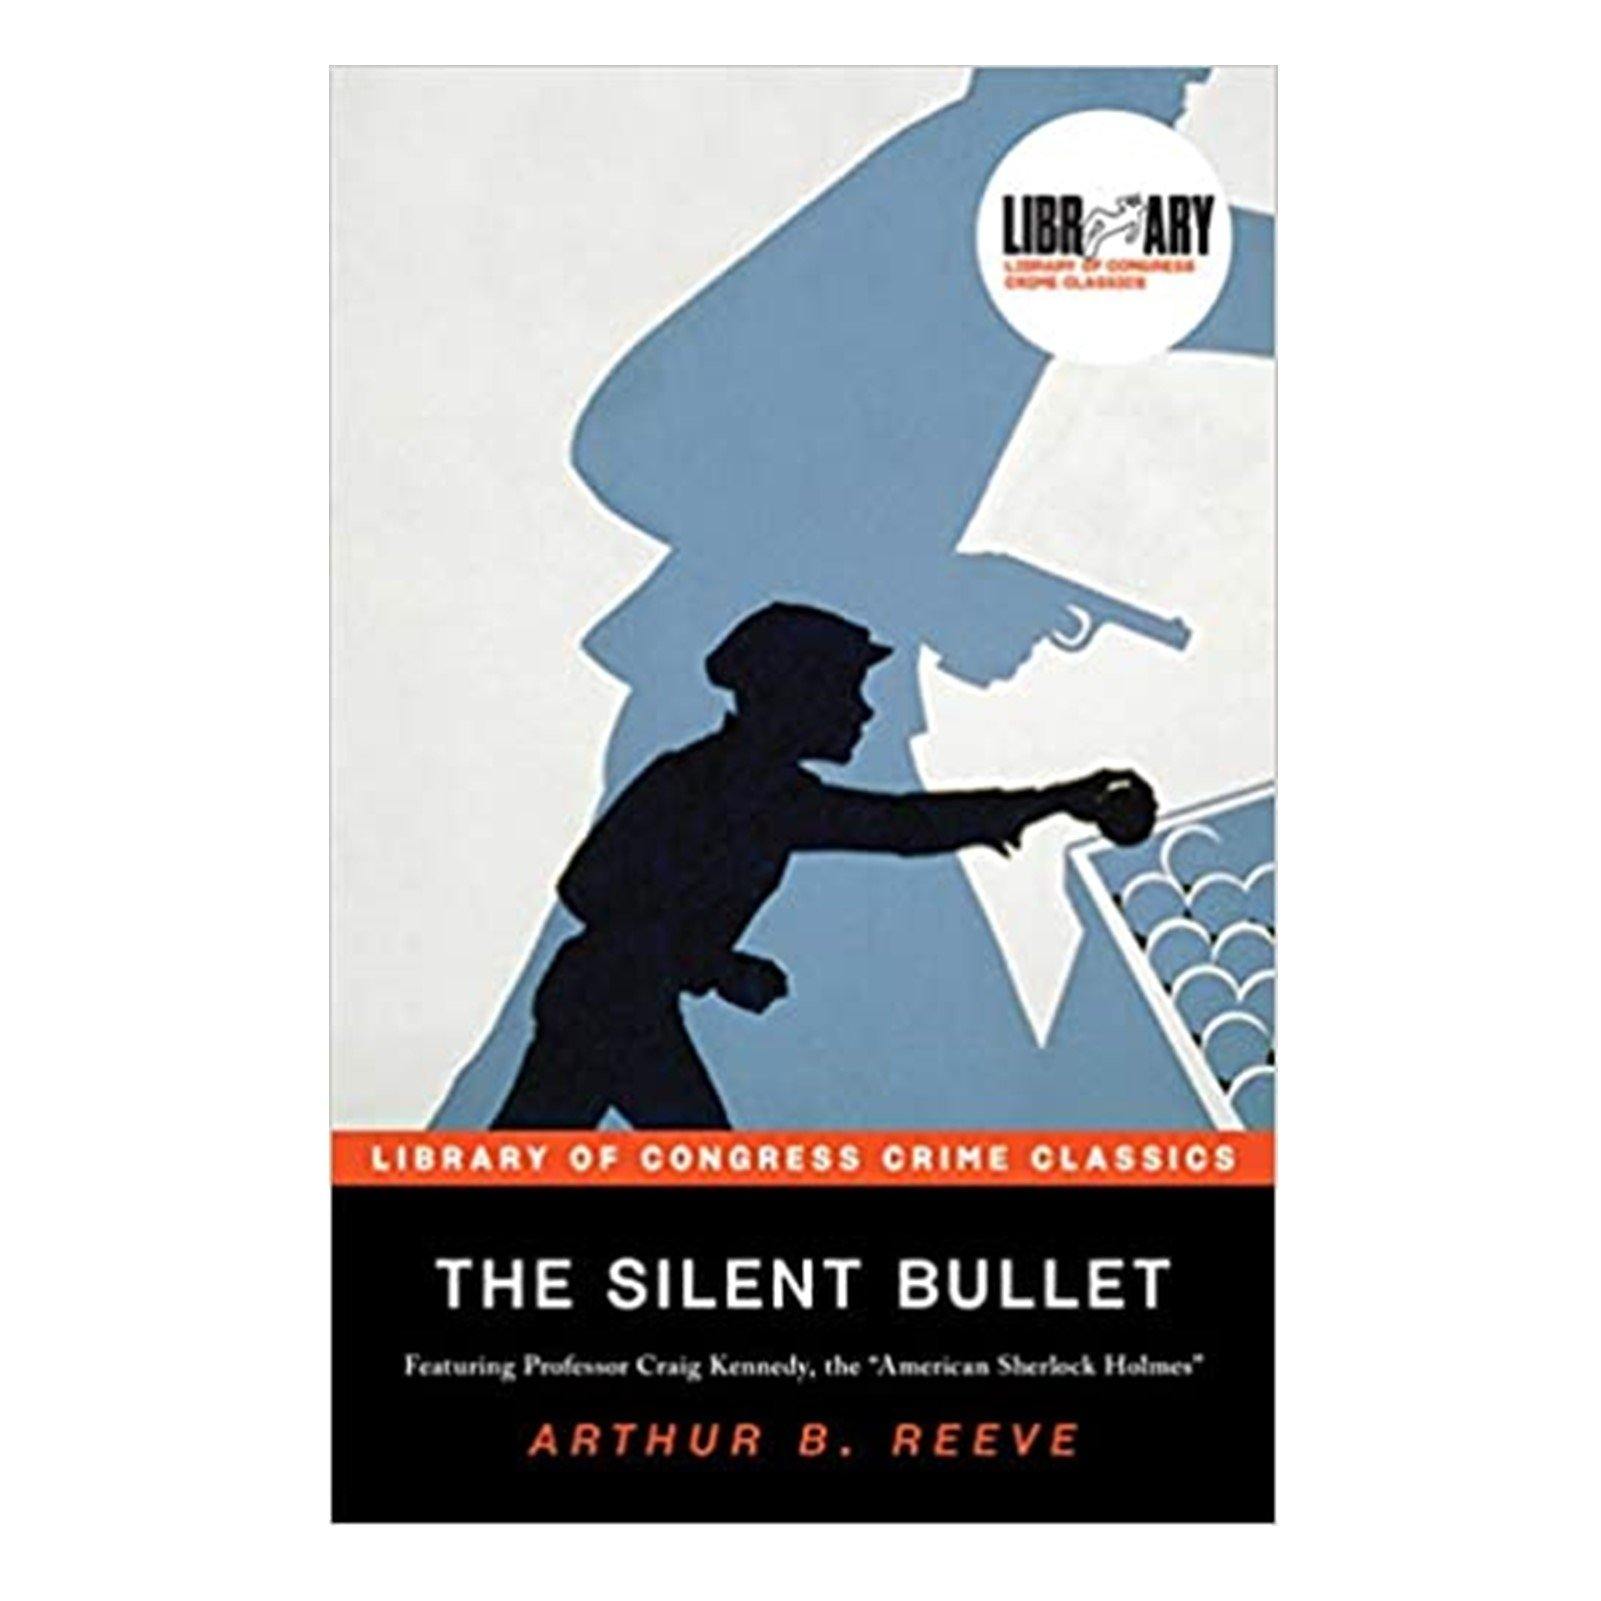 The Silent Bullet - Library of Congress Shop